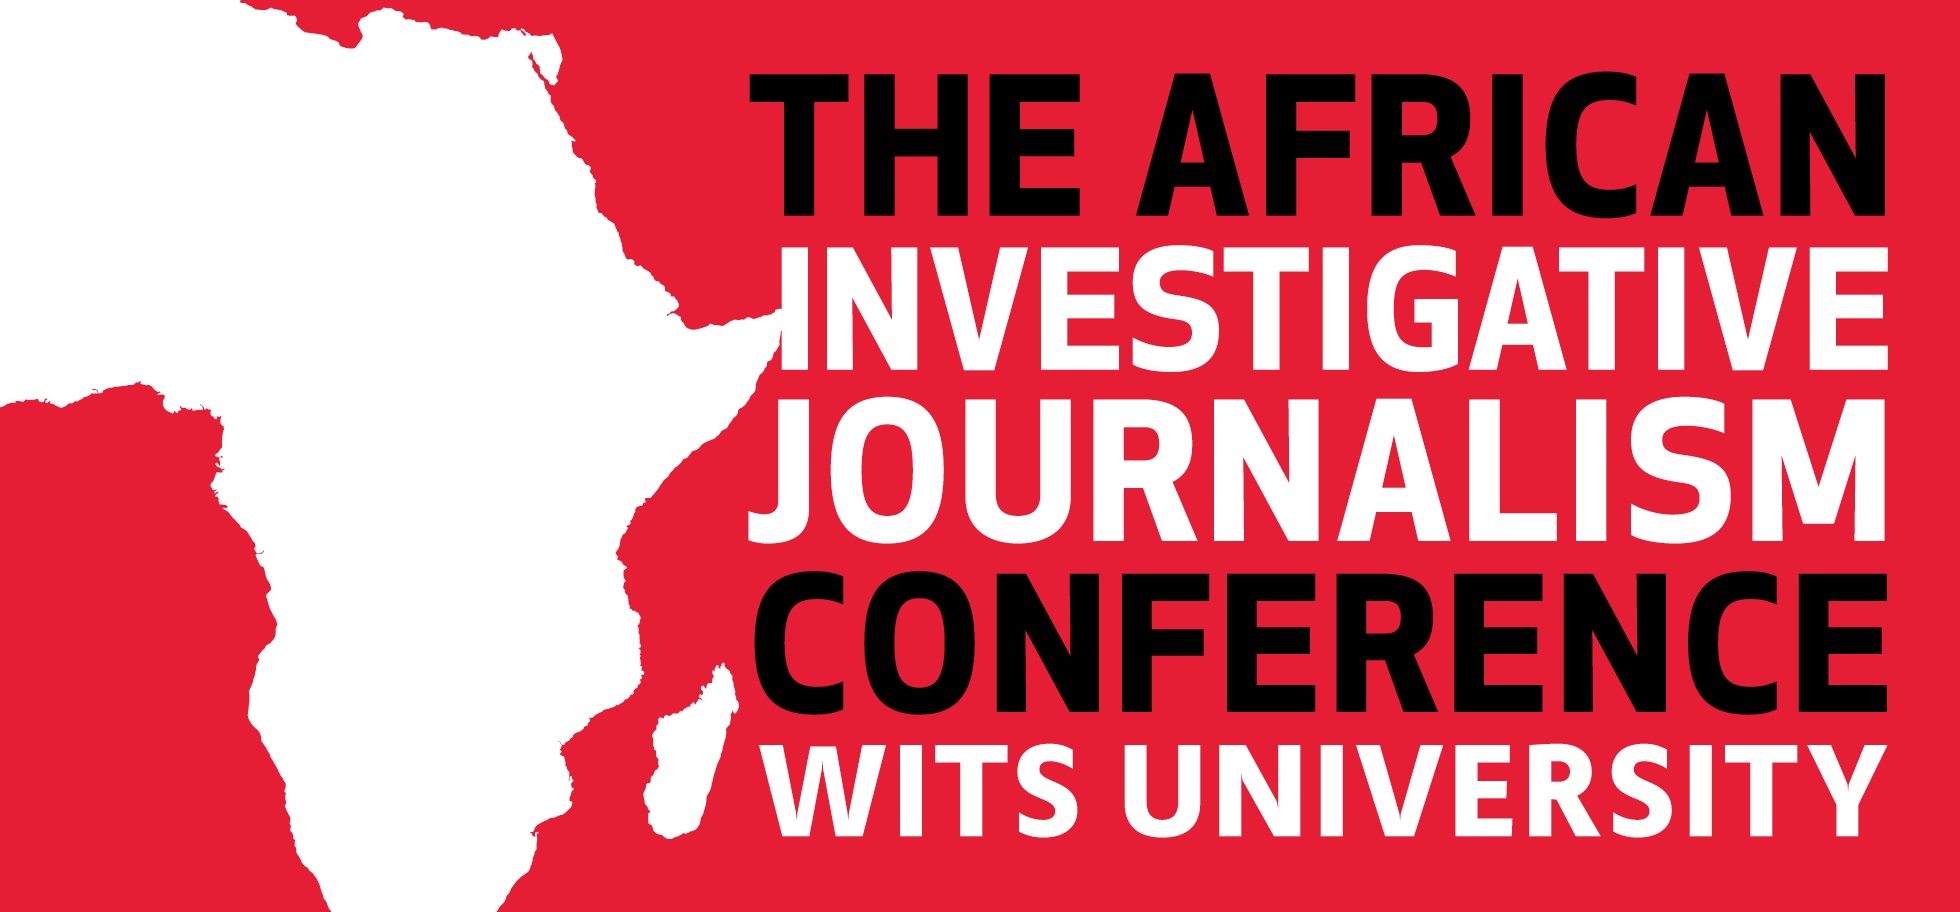 The 18th African Investigative Journalism Conference